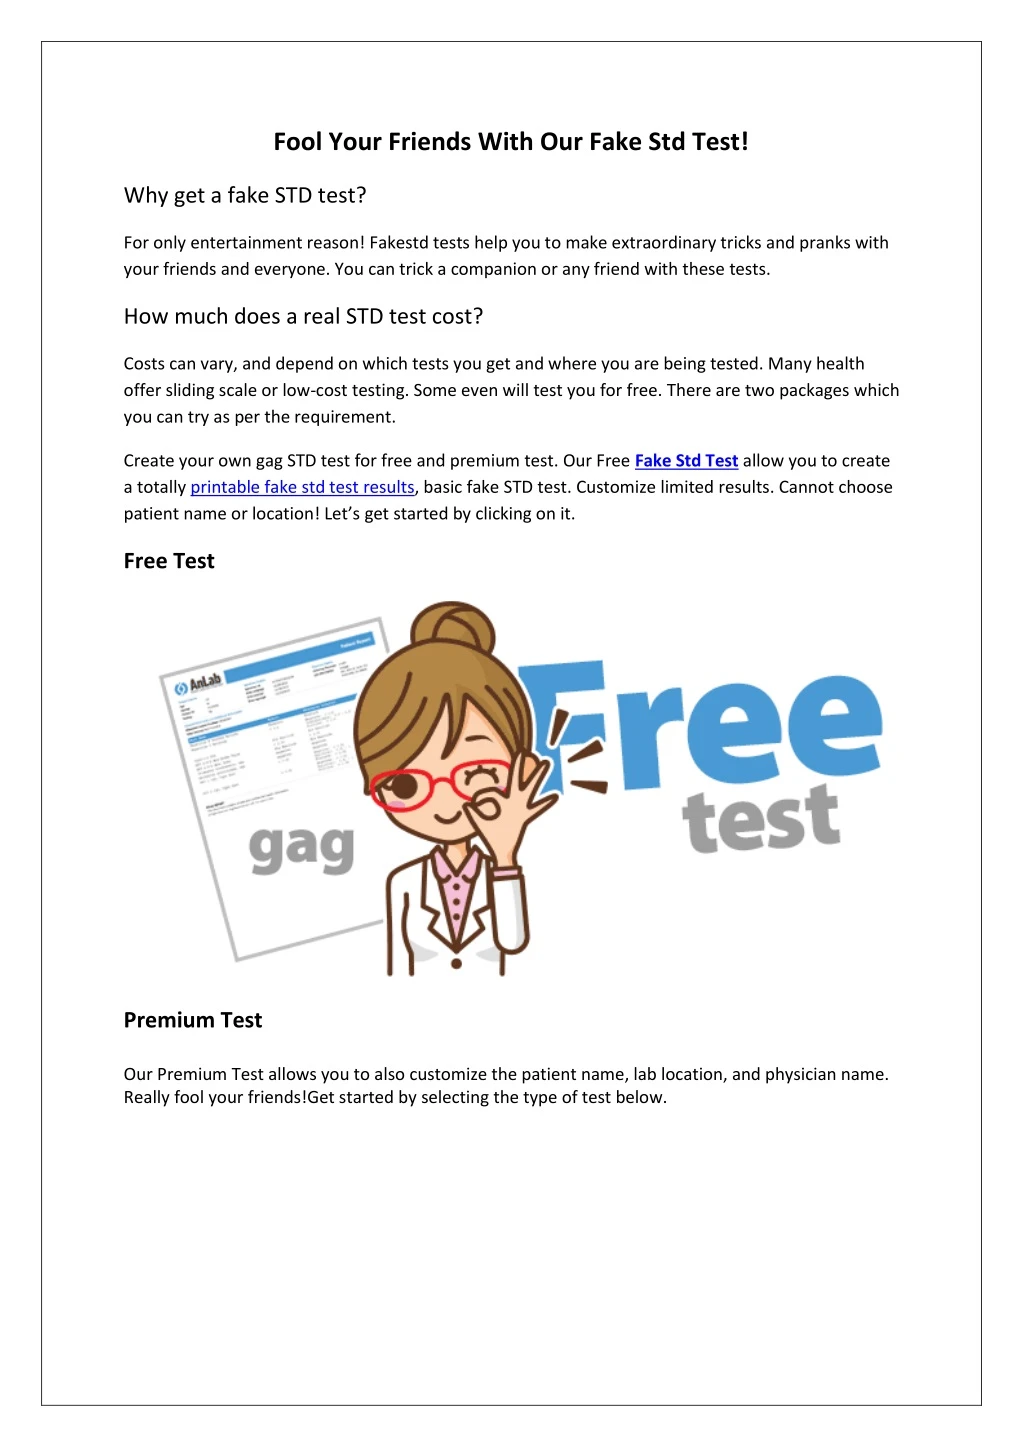 fool your friends with our fake std test